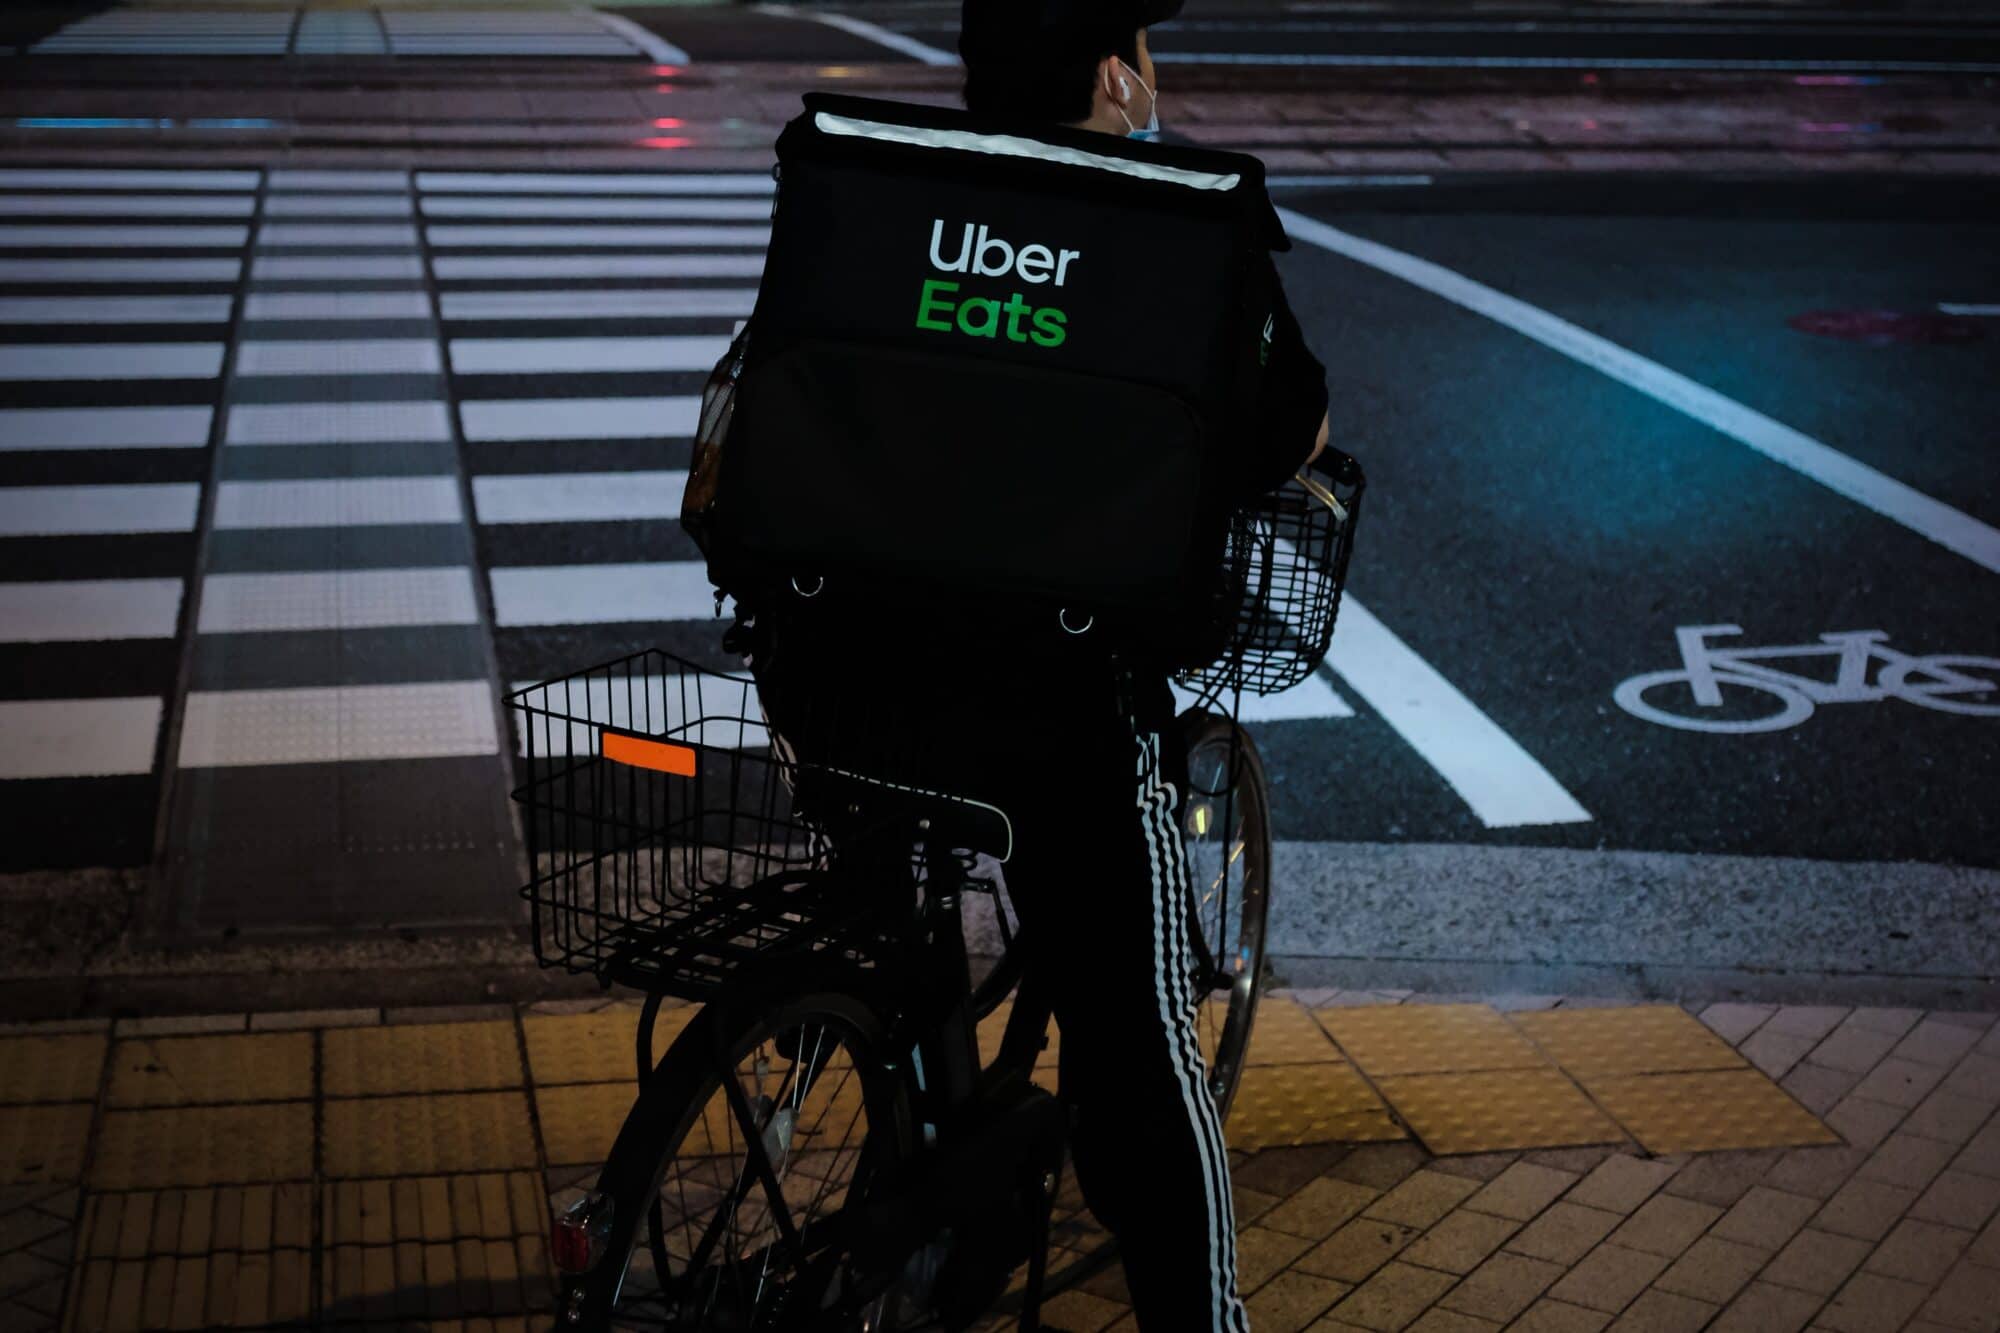 A bike courier with a Uber Eats backpack waits for the traffic signal before crossing the street at an intersection.